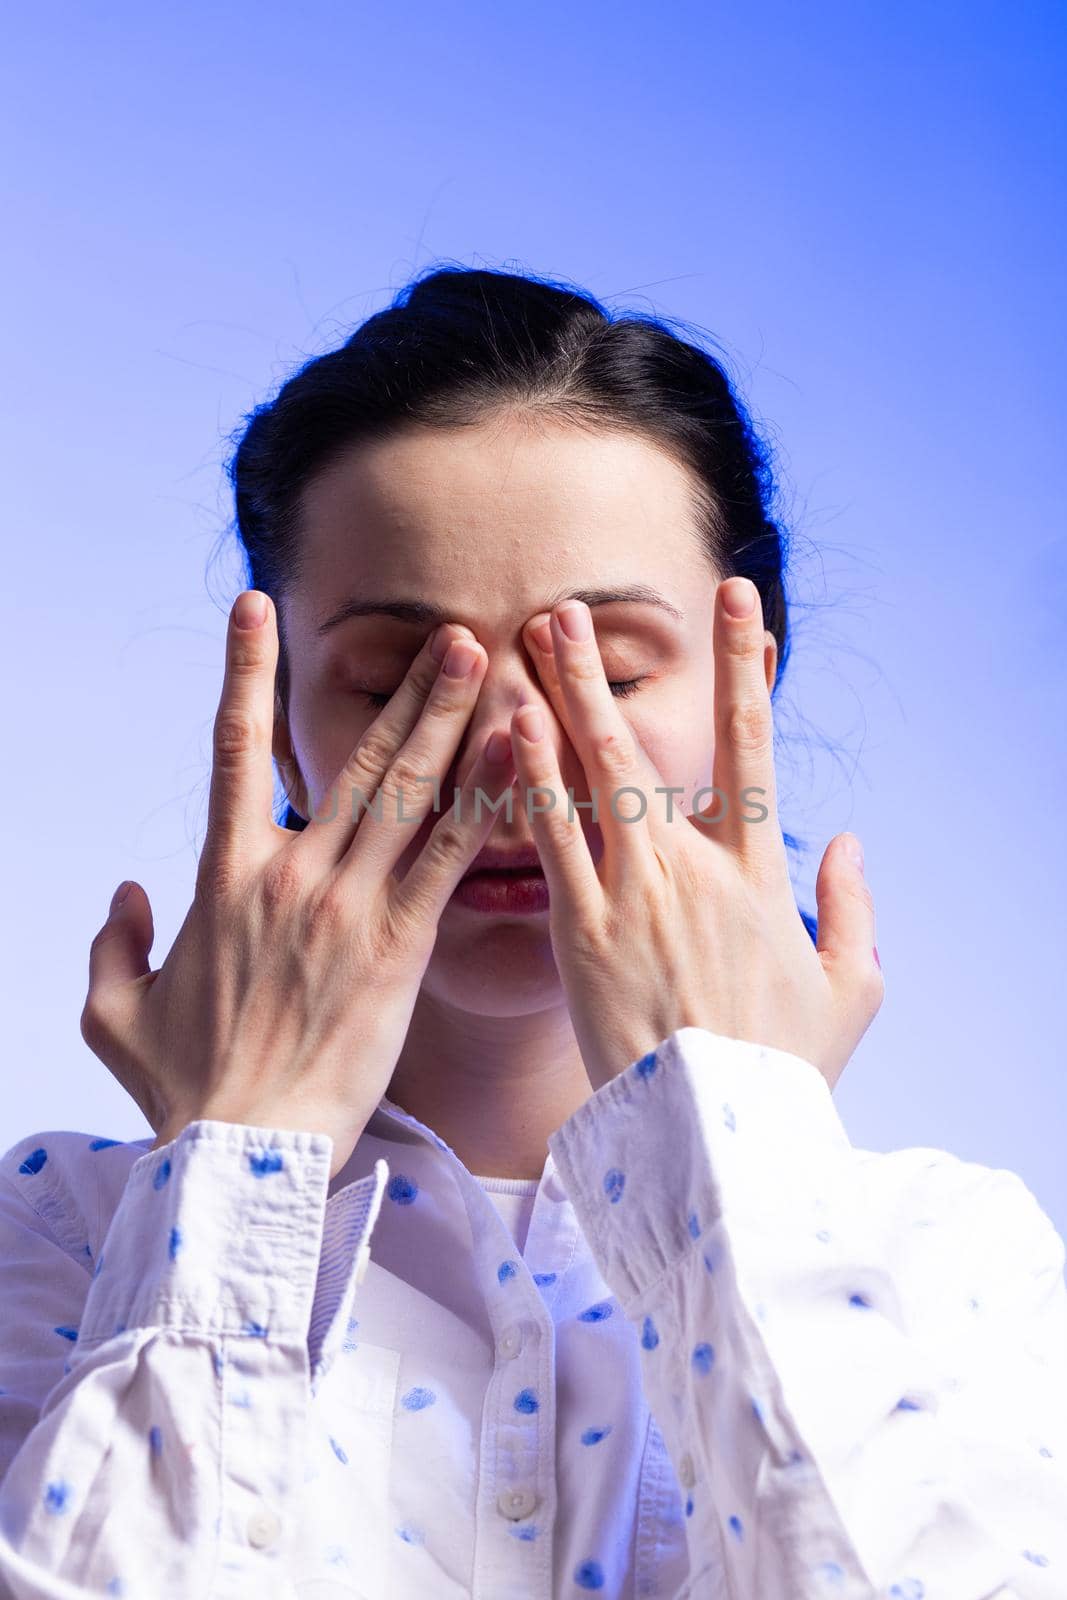 brunette woman in a white shirt with polka dots, on a blue background. High quality photo